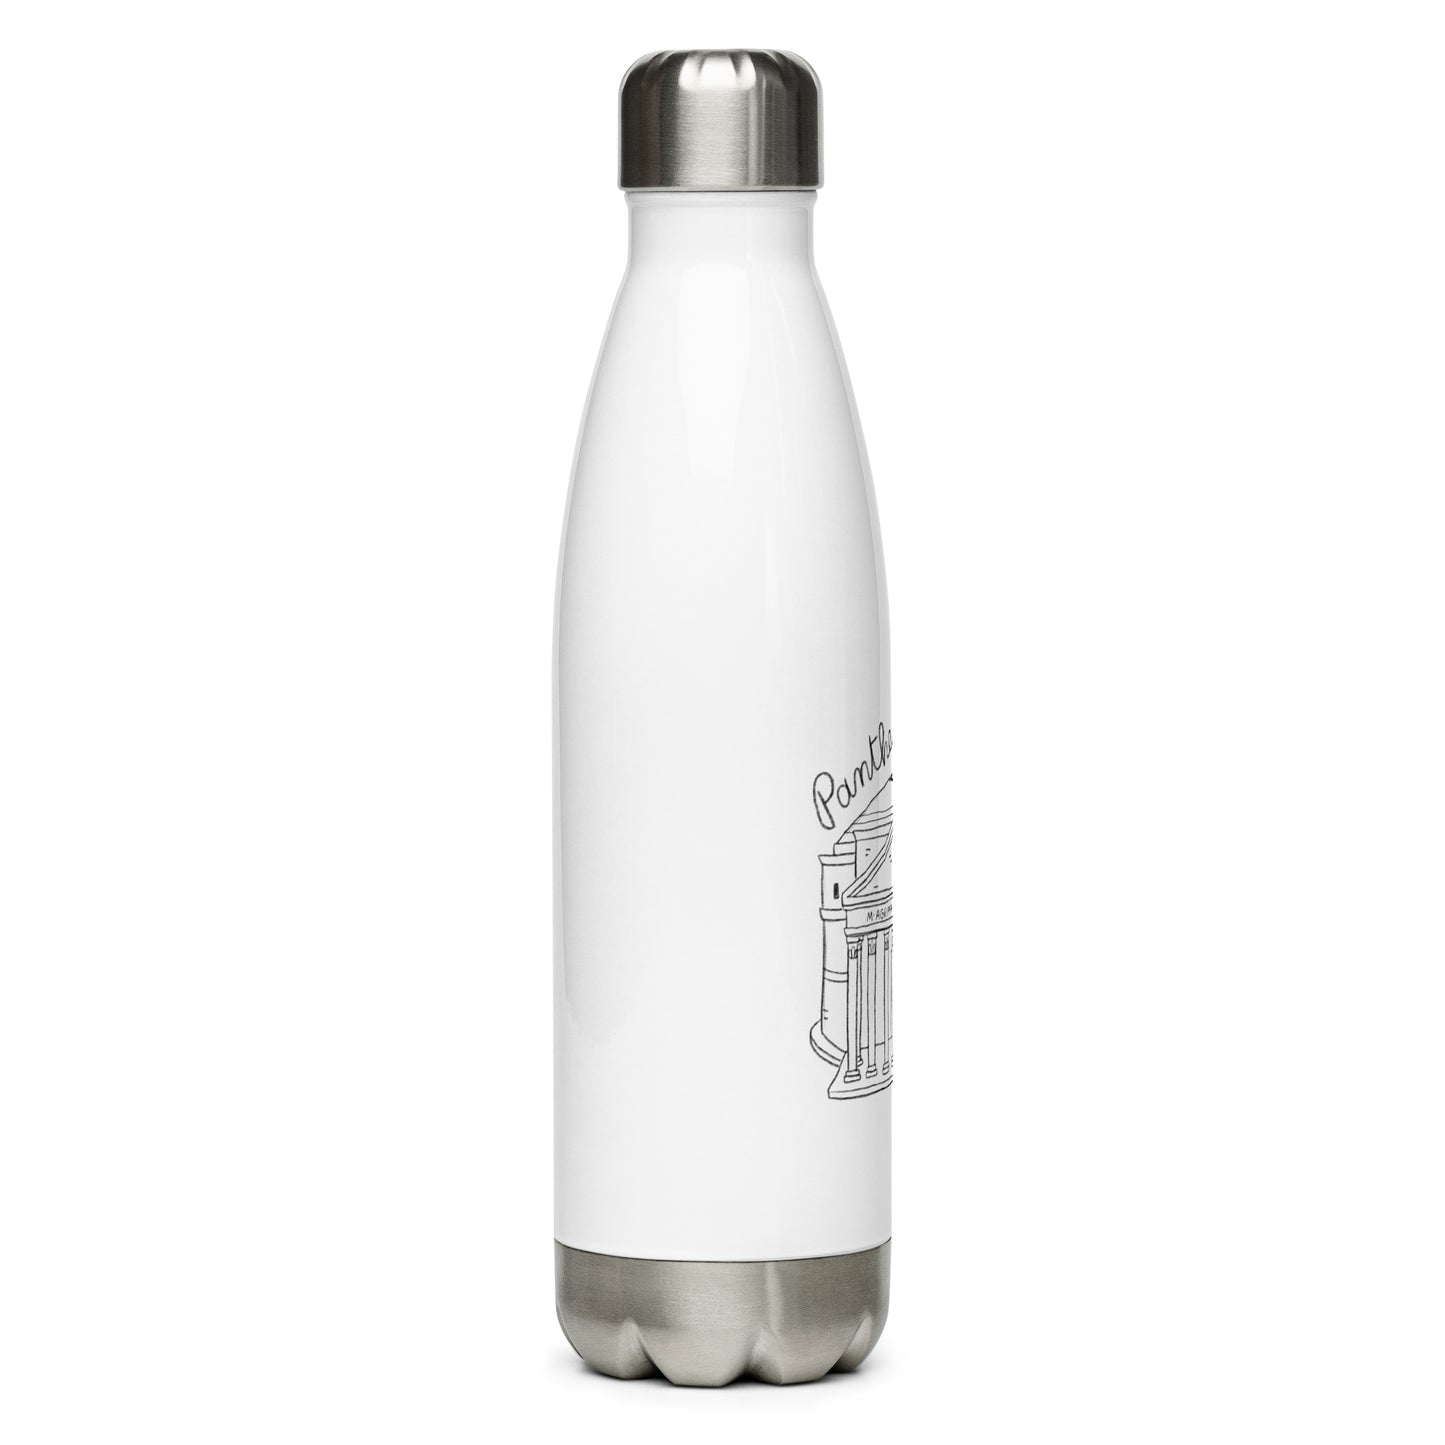 Pantheon on a Stainless steel water bottle